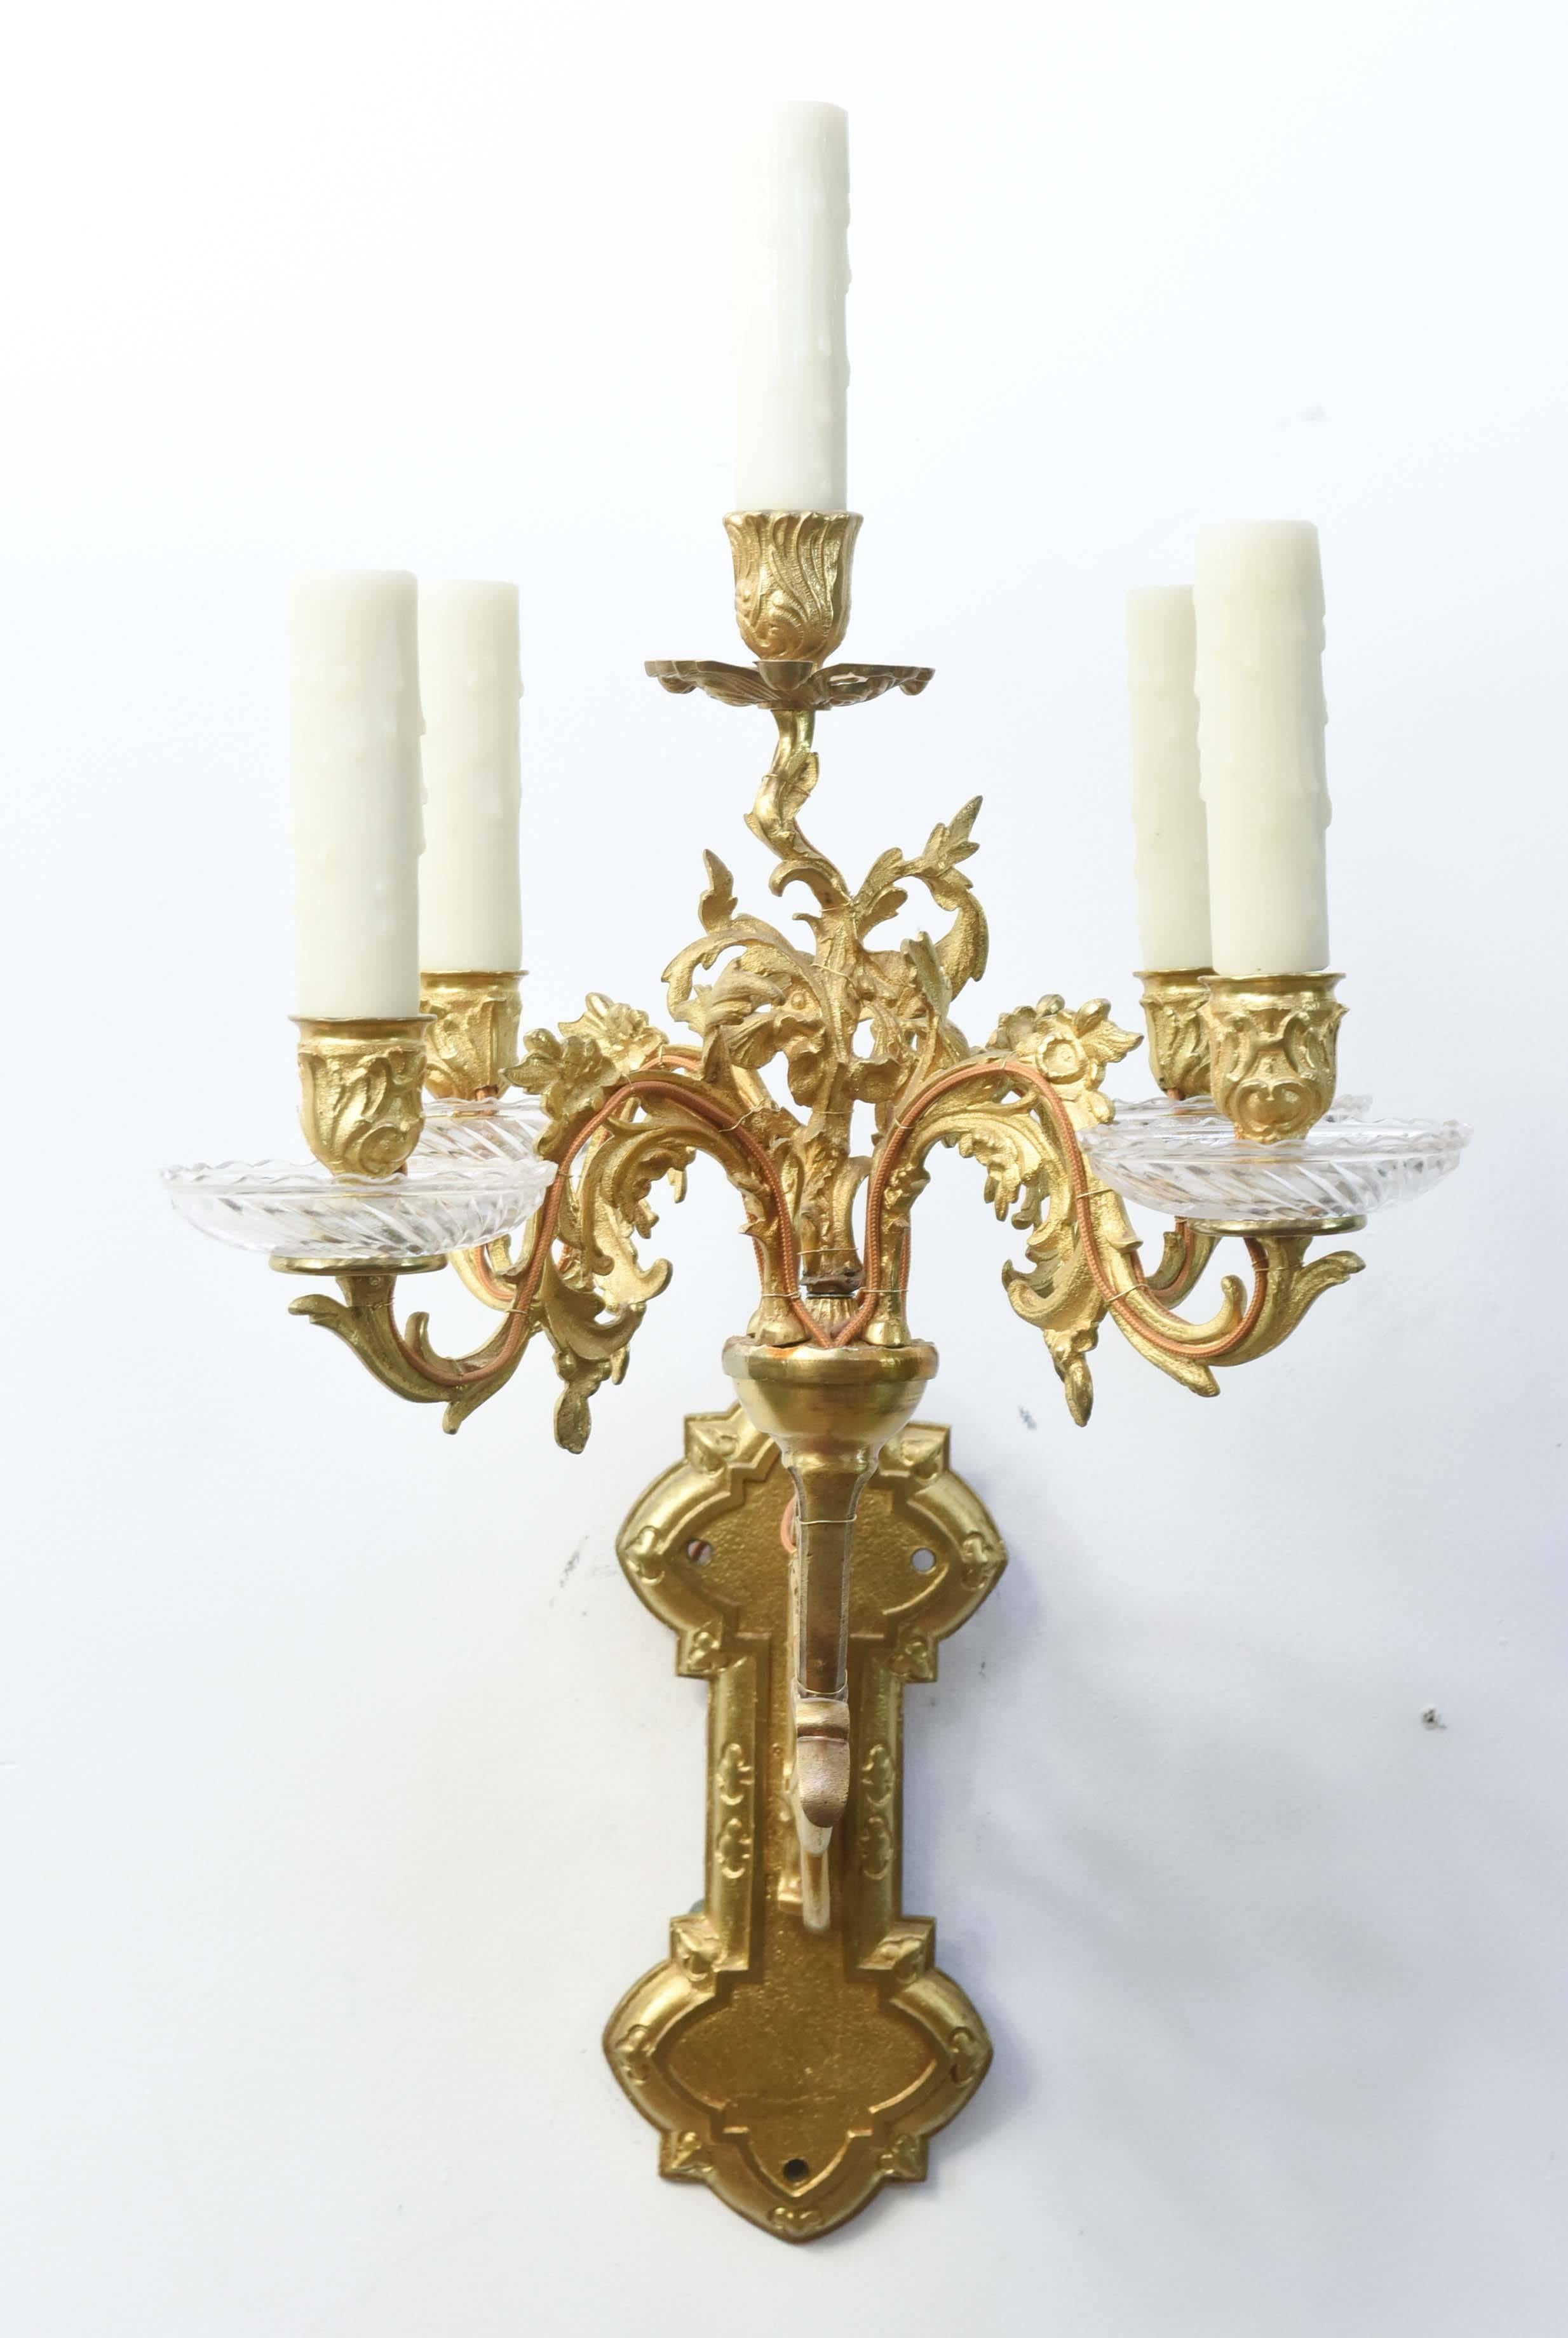 Candelabra style sconces with five lights. Originally candle. Ornate gilt bronze with glass candle cups. Matches a pair of single arm sconces, S110, posted separately.